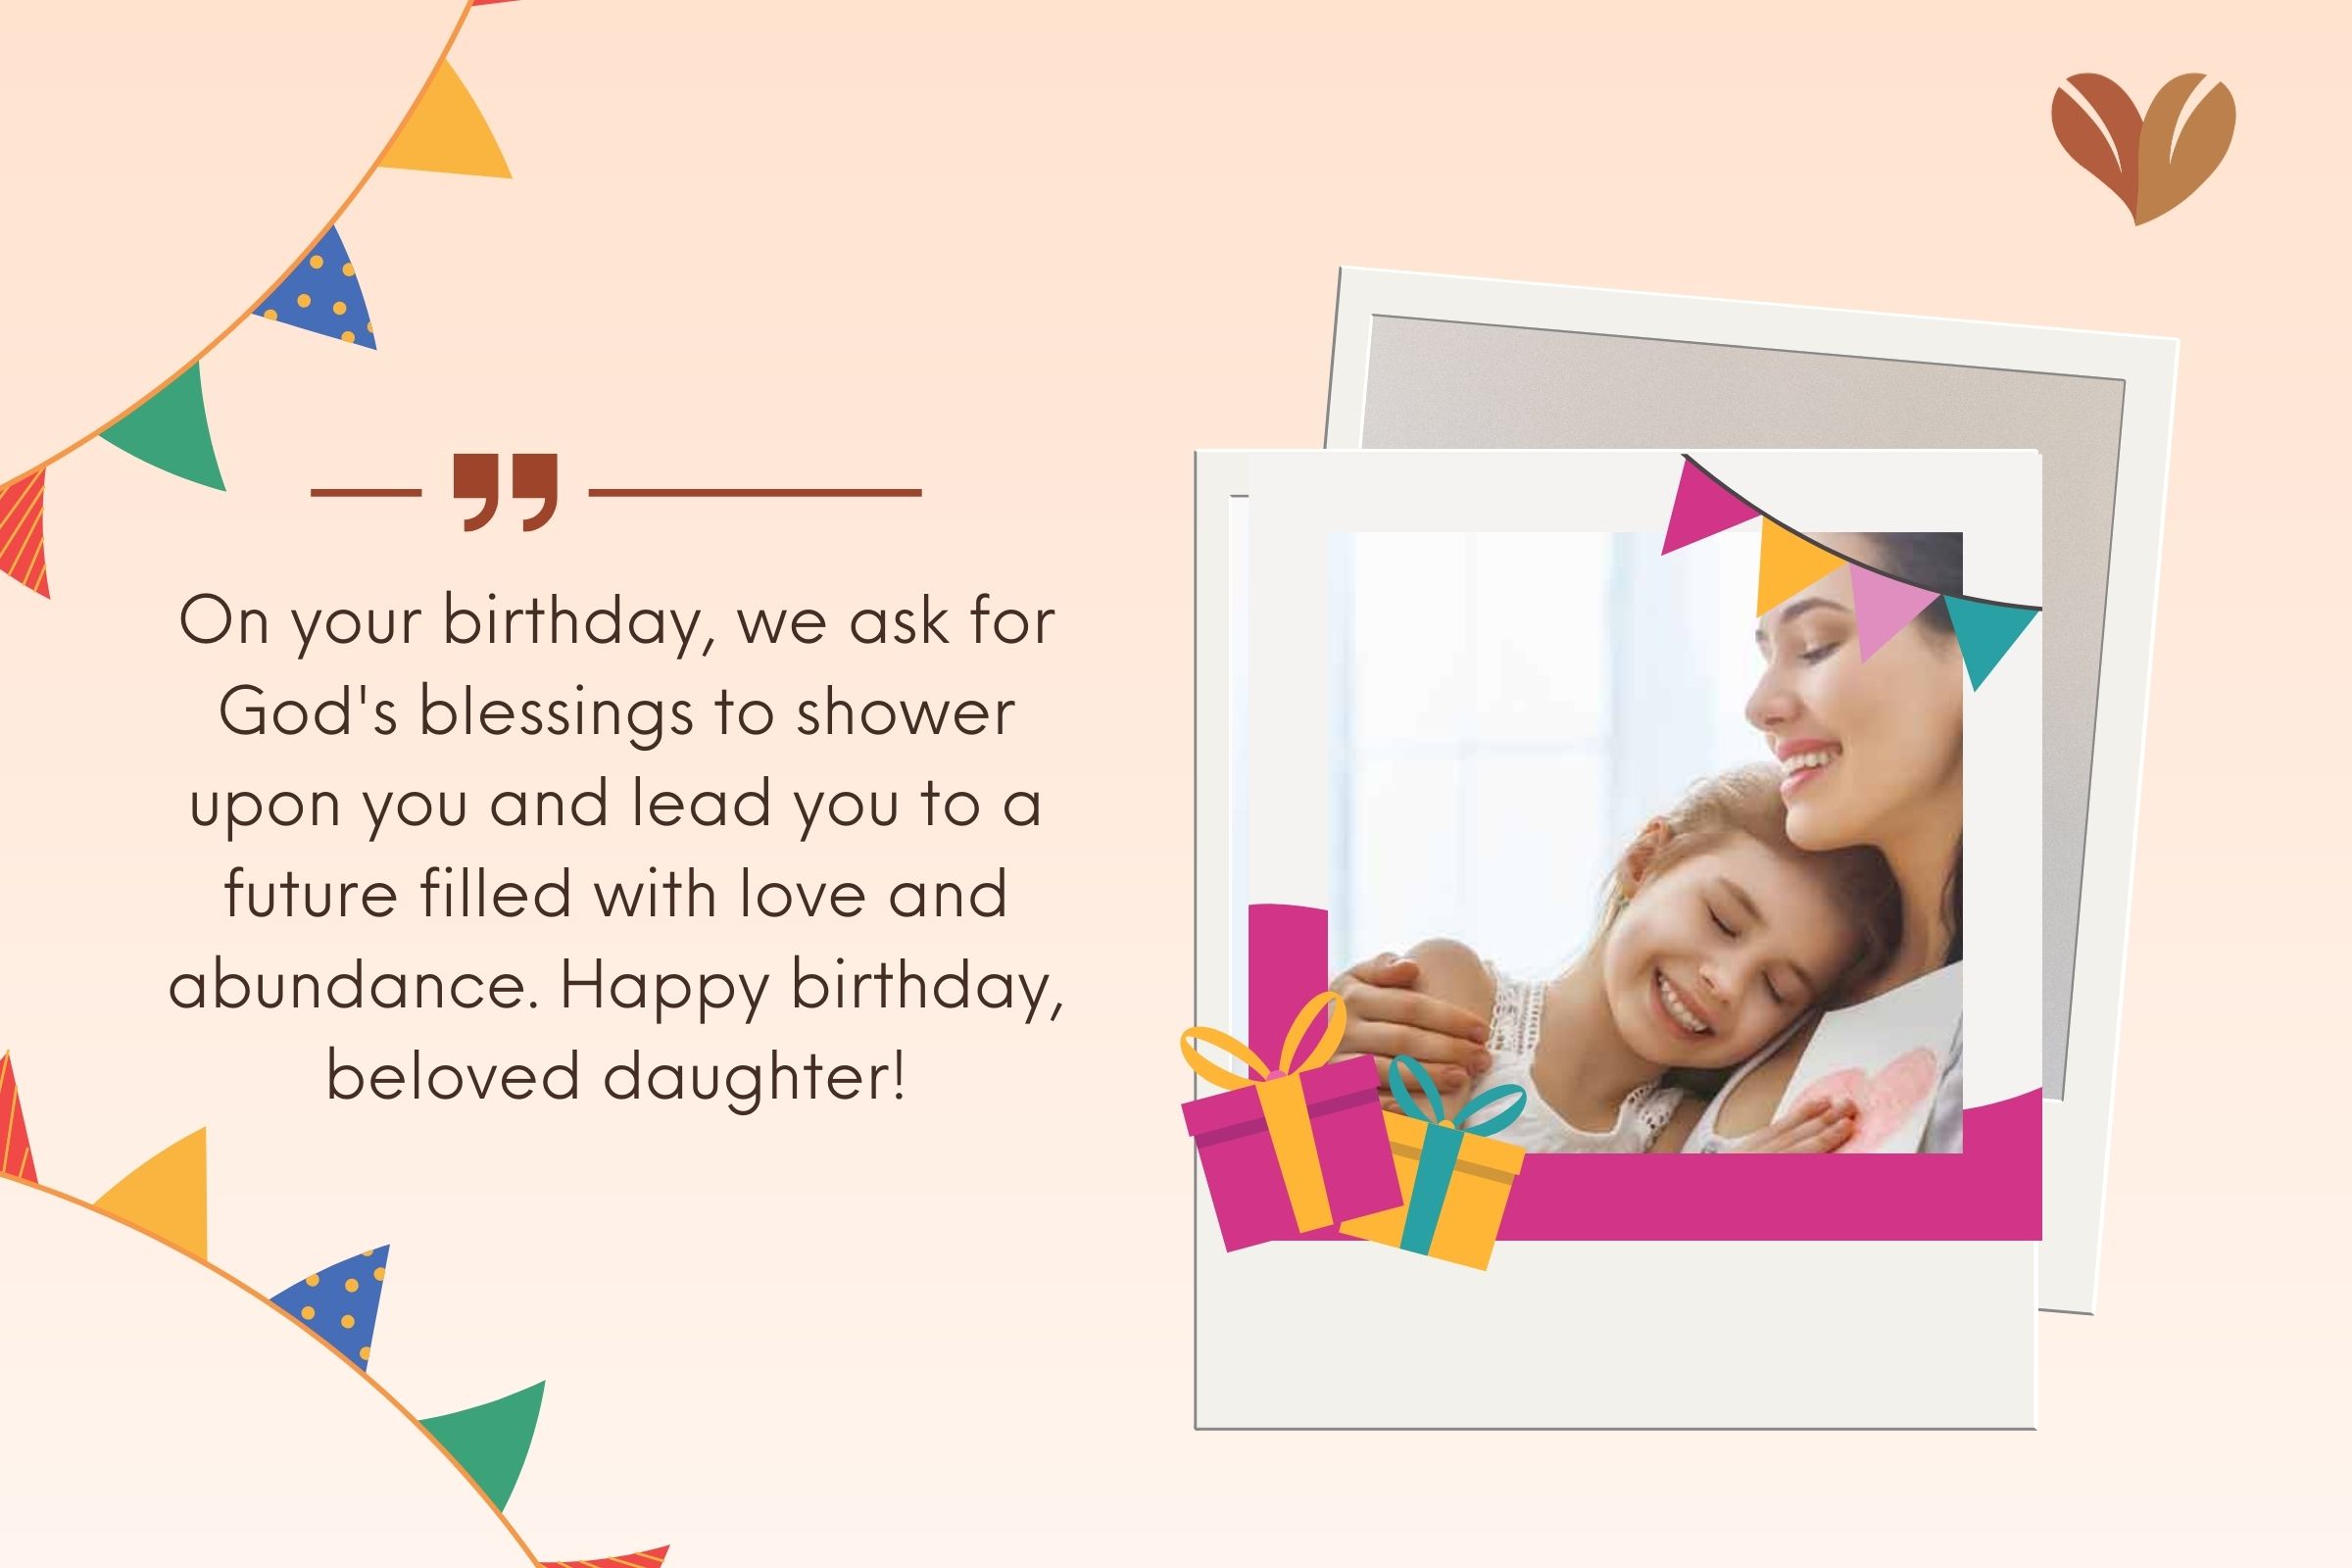 Gift-filled birthday greetings for dear daughter